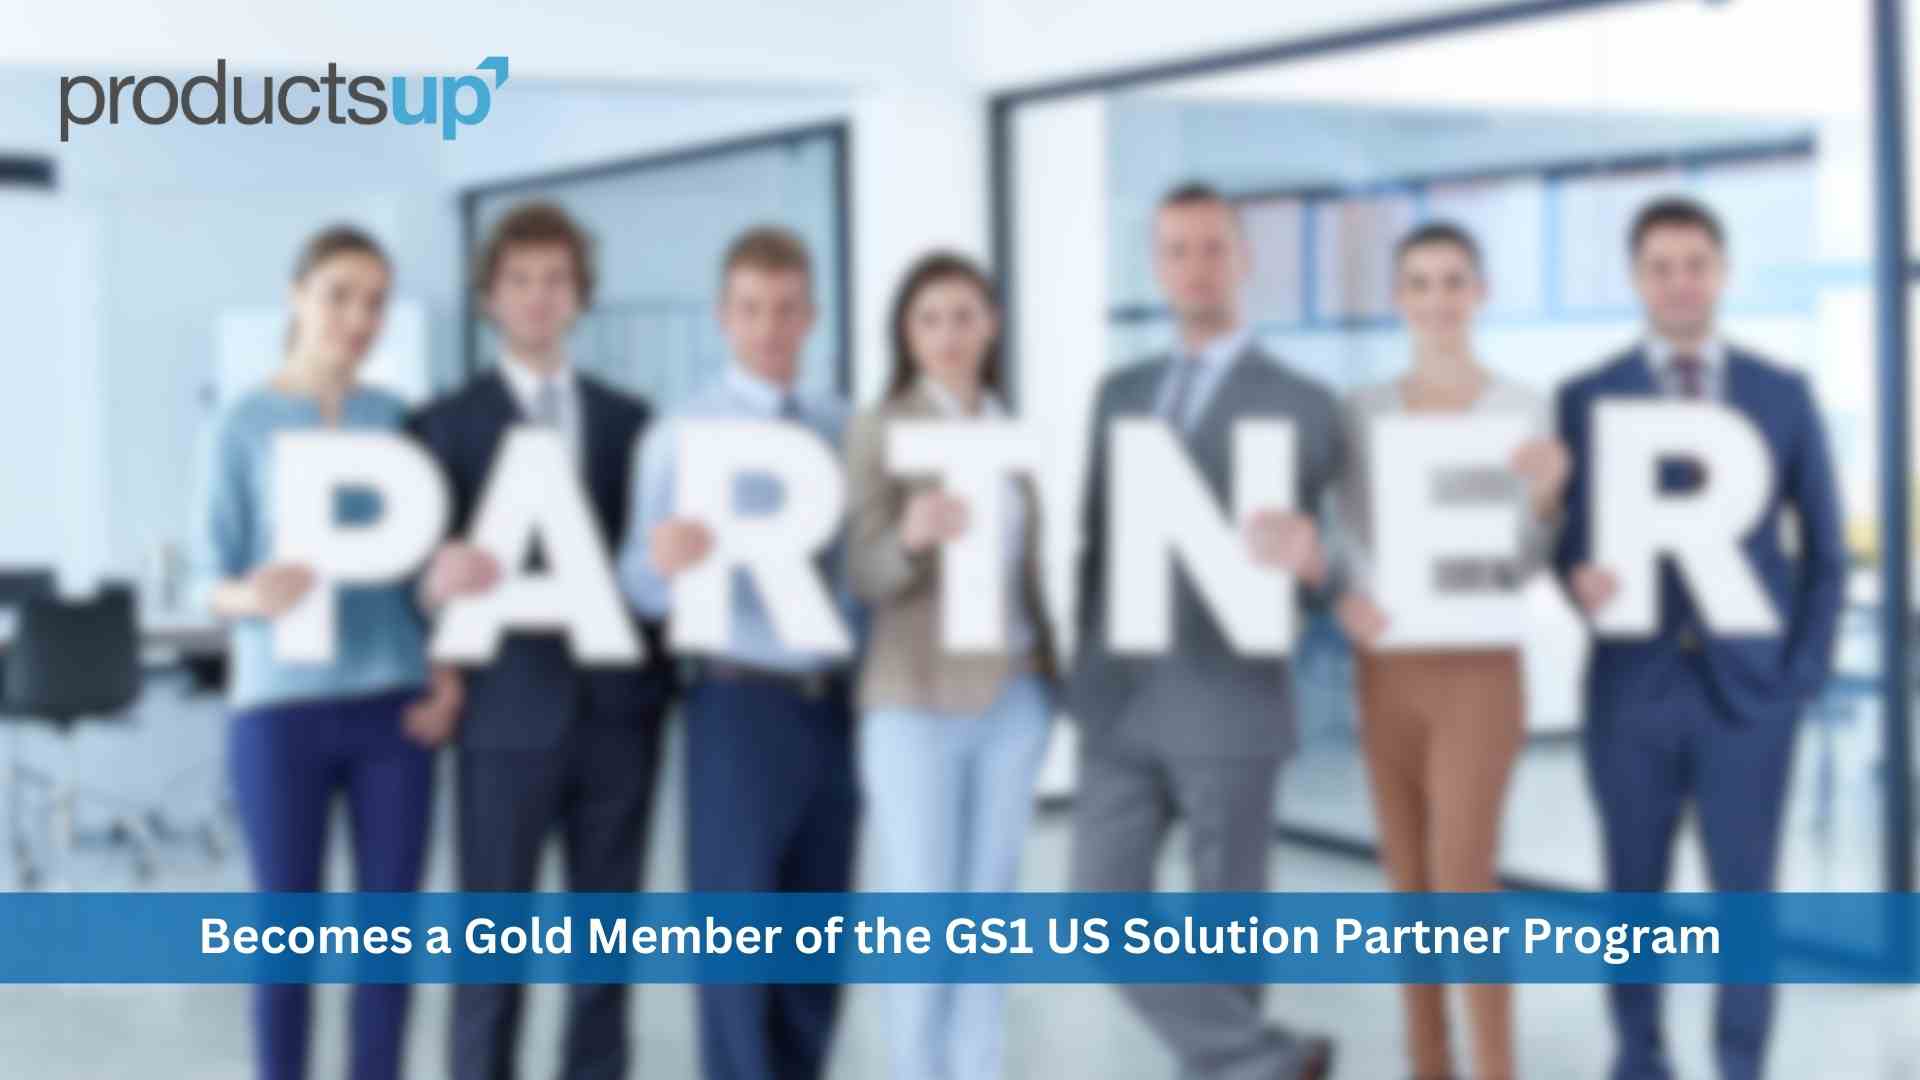 Productsup becomes a GS1 US Solution Partner